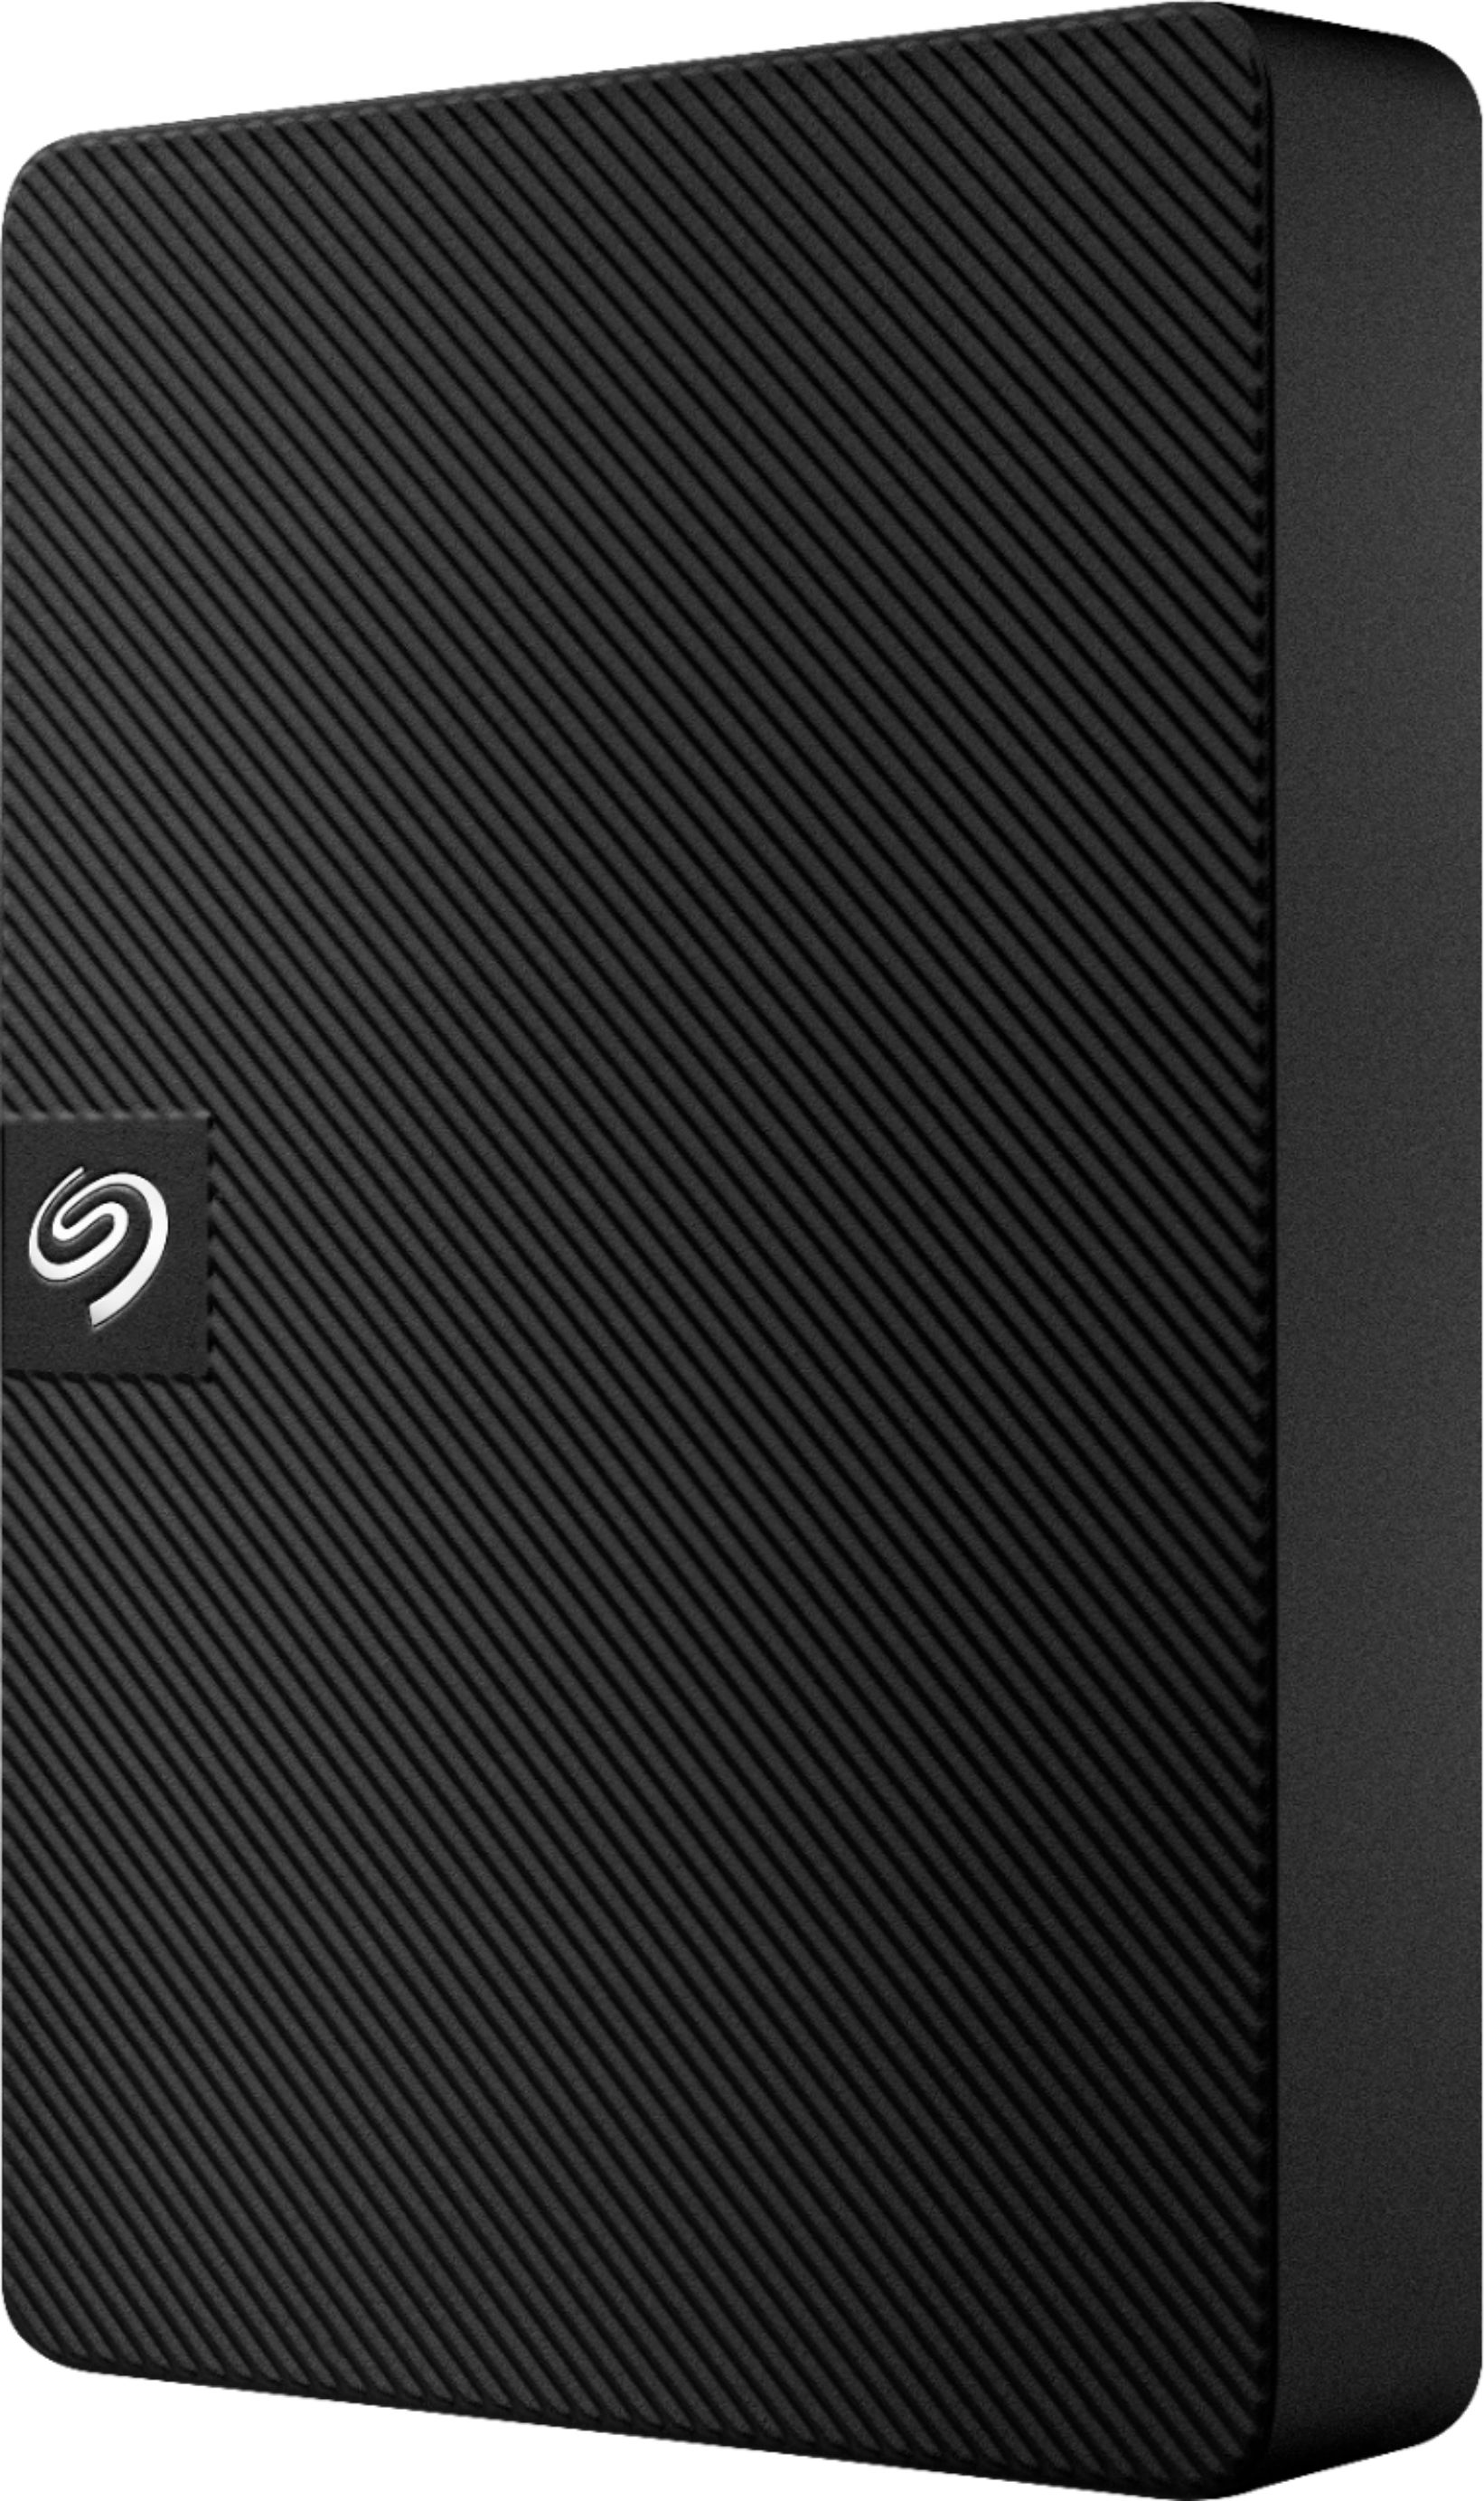 Best Buy: Seagate Expansion 4TB External USB 3.0 Portable Hard Drive ...